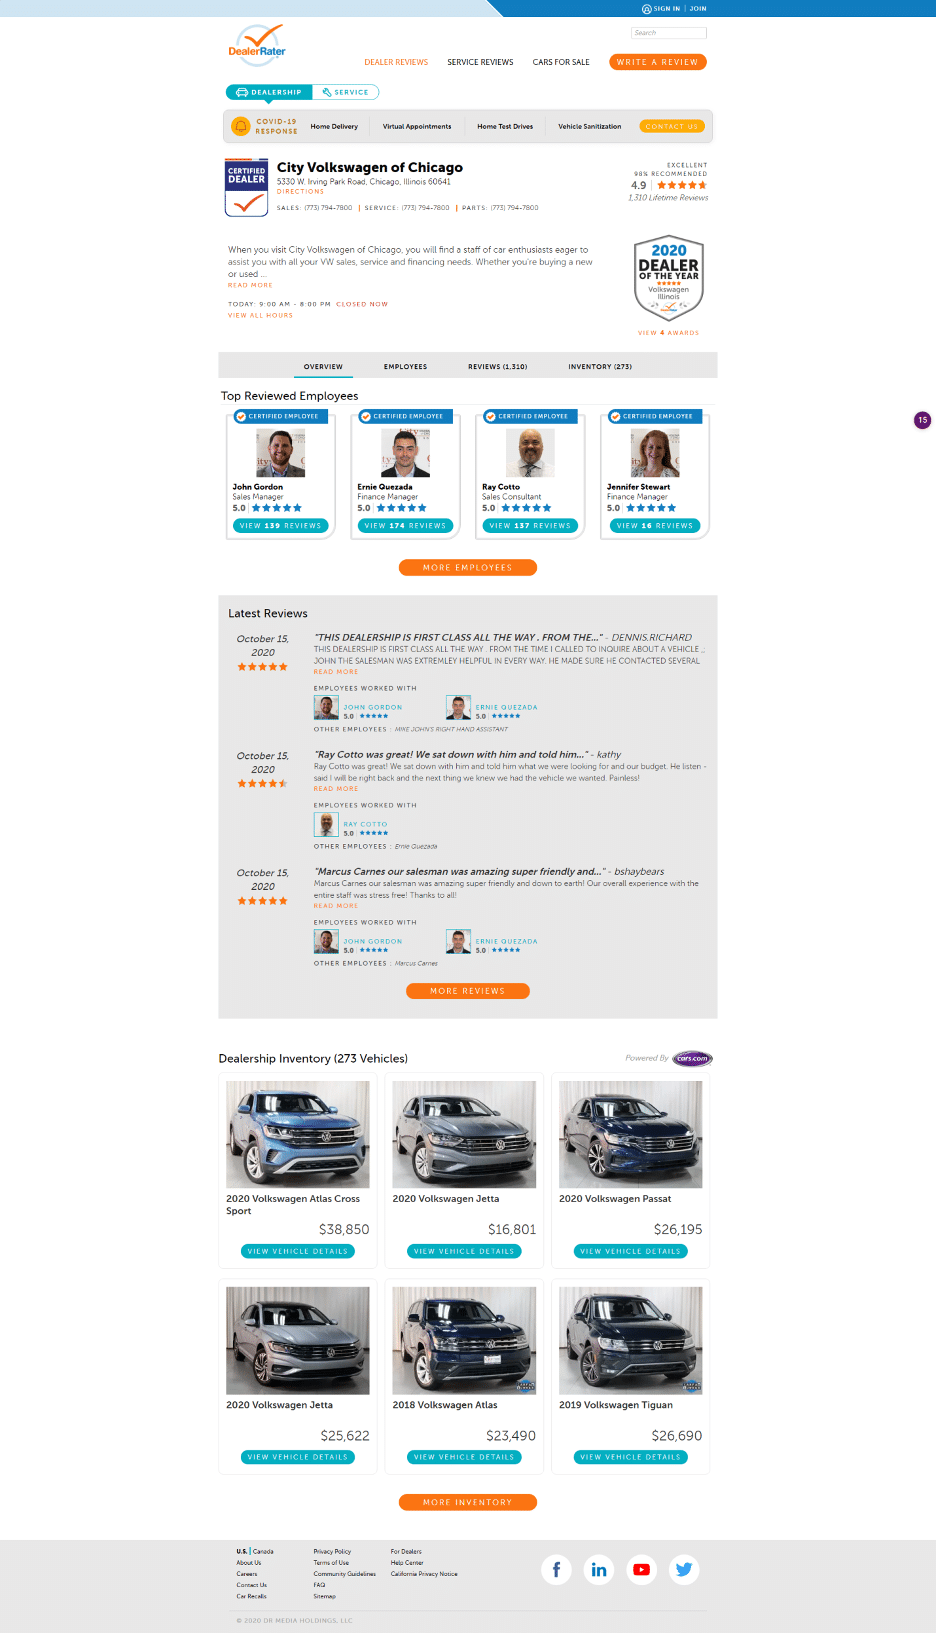 DealerRater example listing